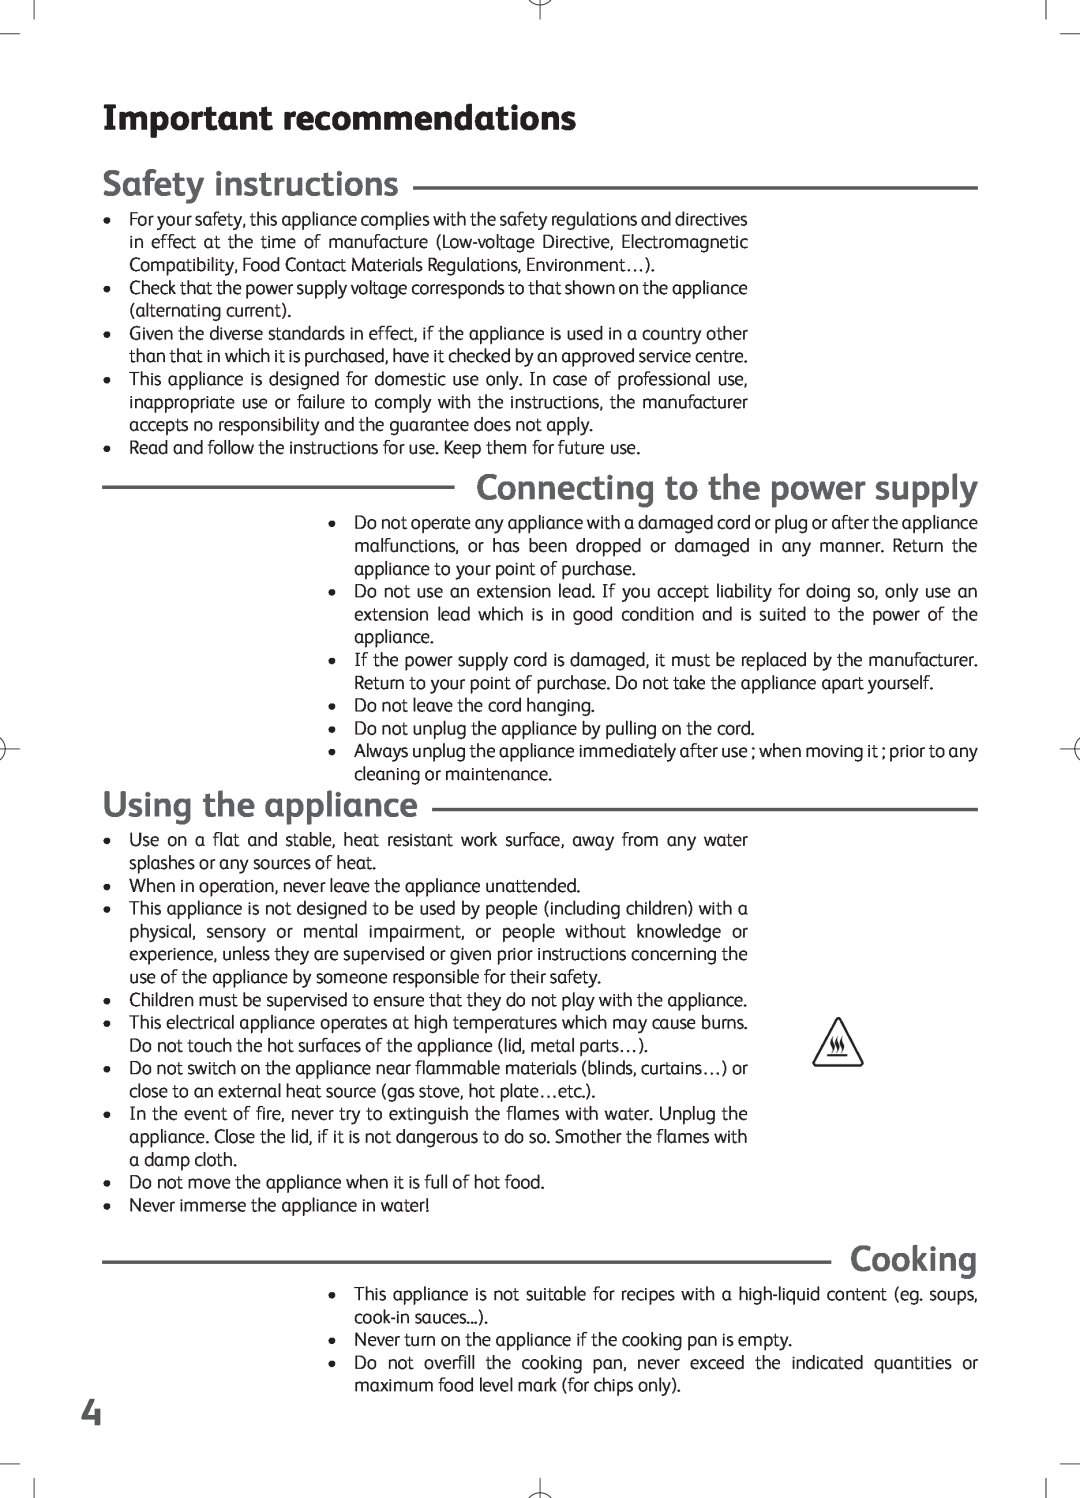 Tefal FZ700233 manual Important recommendations, Safety instructions, Connecting to the power supply, Using the appliance 